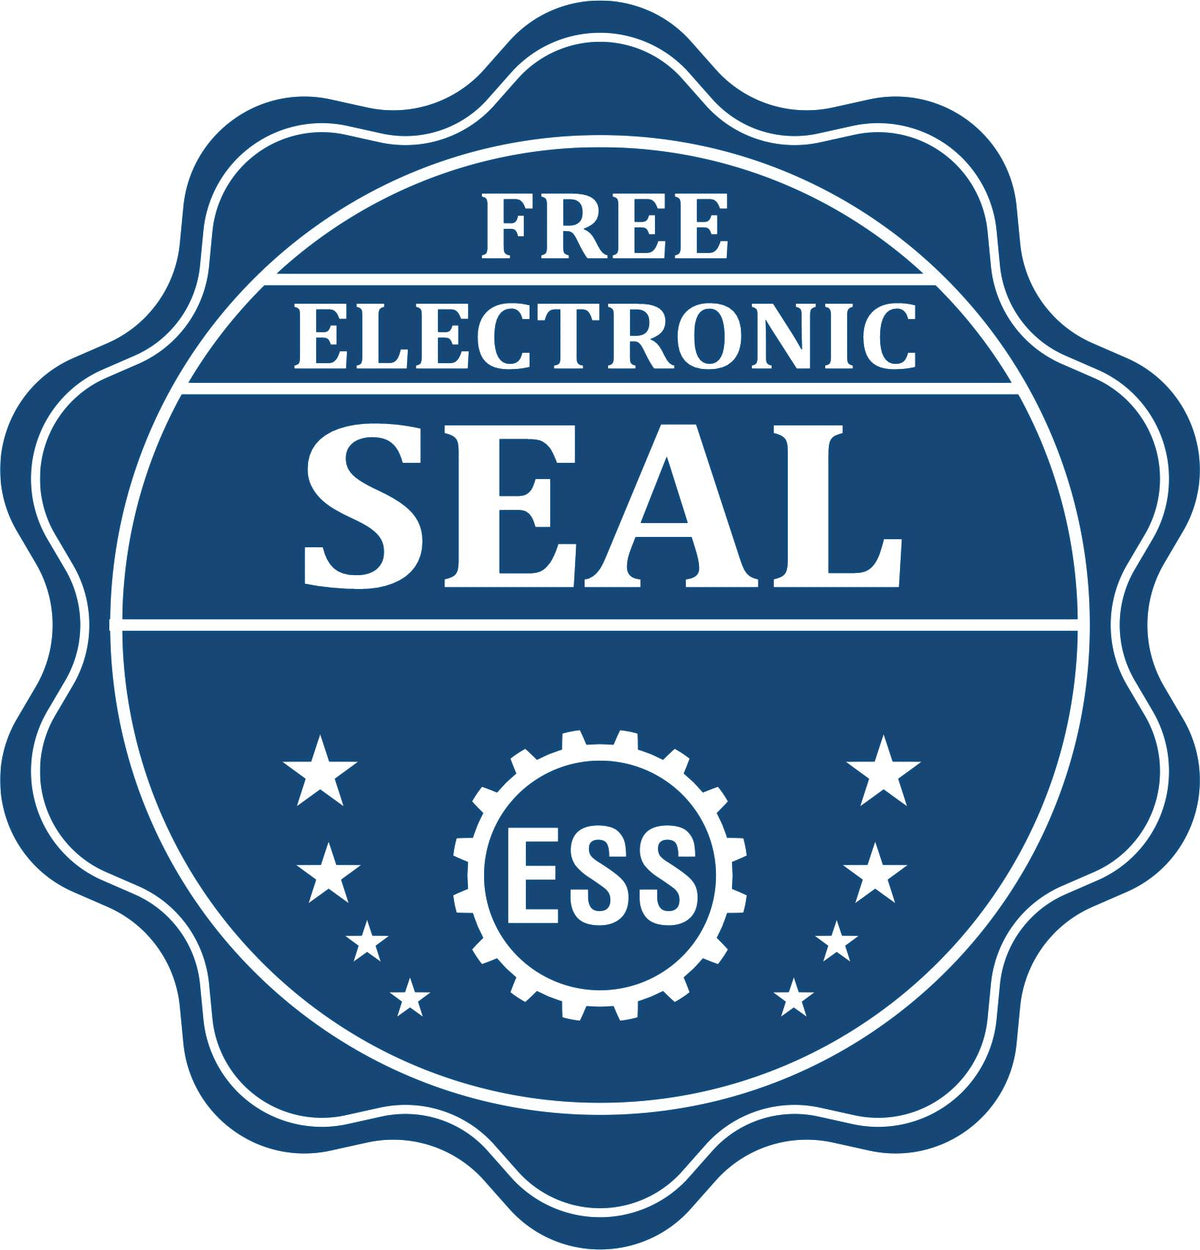 A badge showing a free electronic seal for the Handheld Oregon Professional Geologist Embosser with stars and the ESS gear on the emblem.